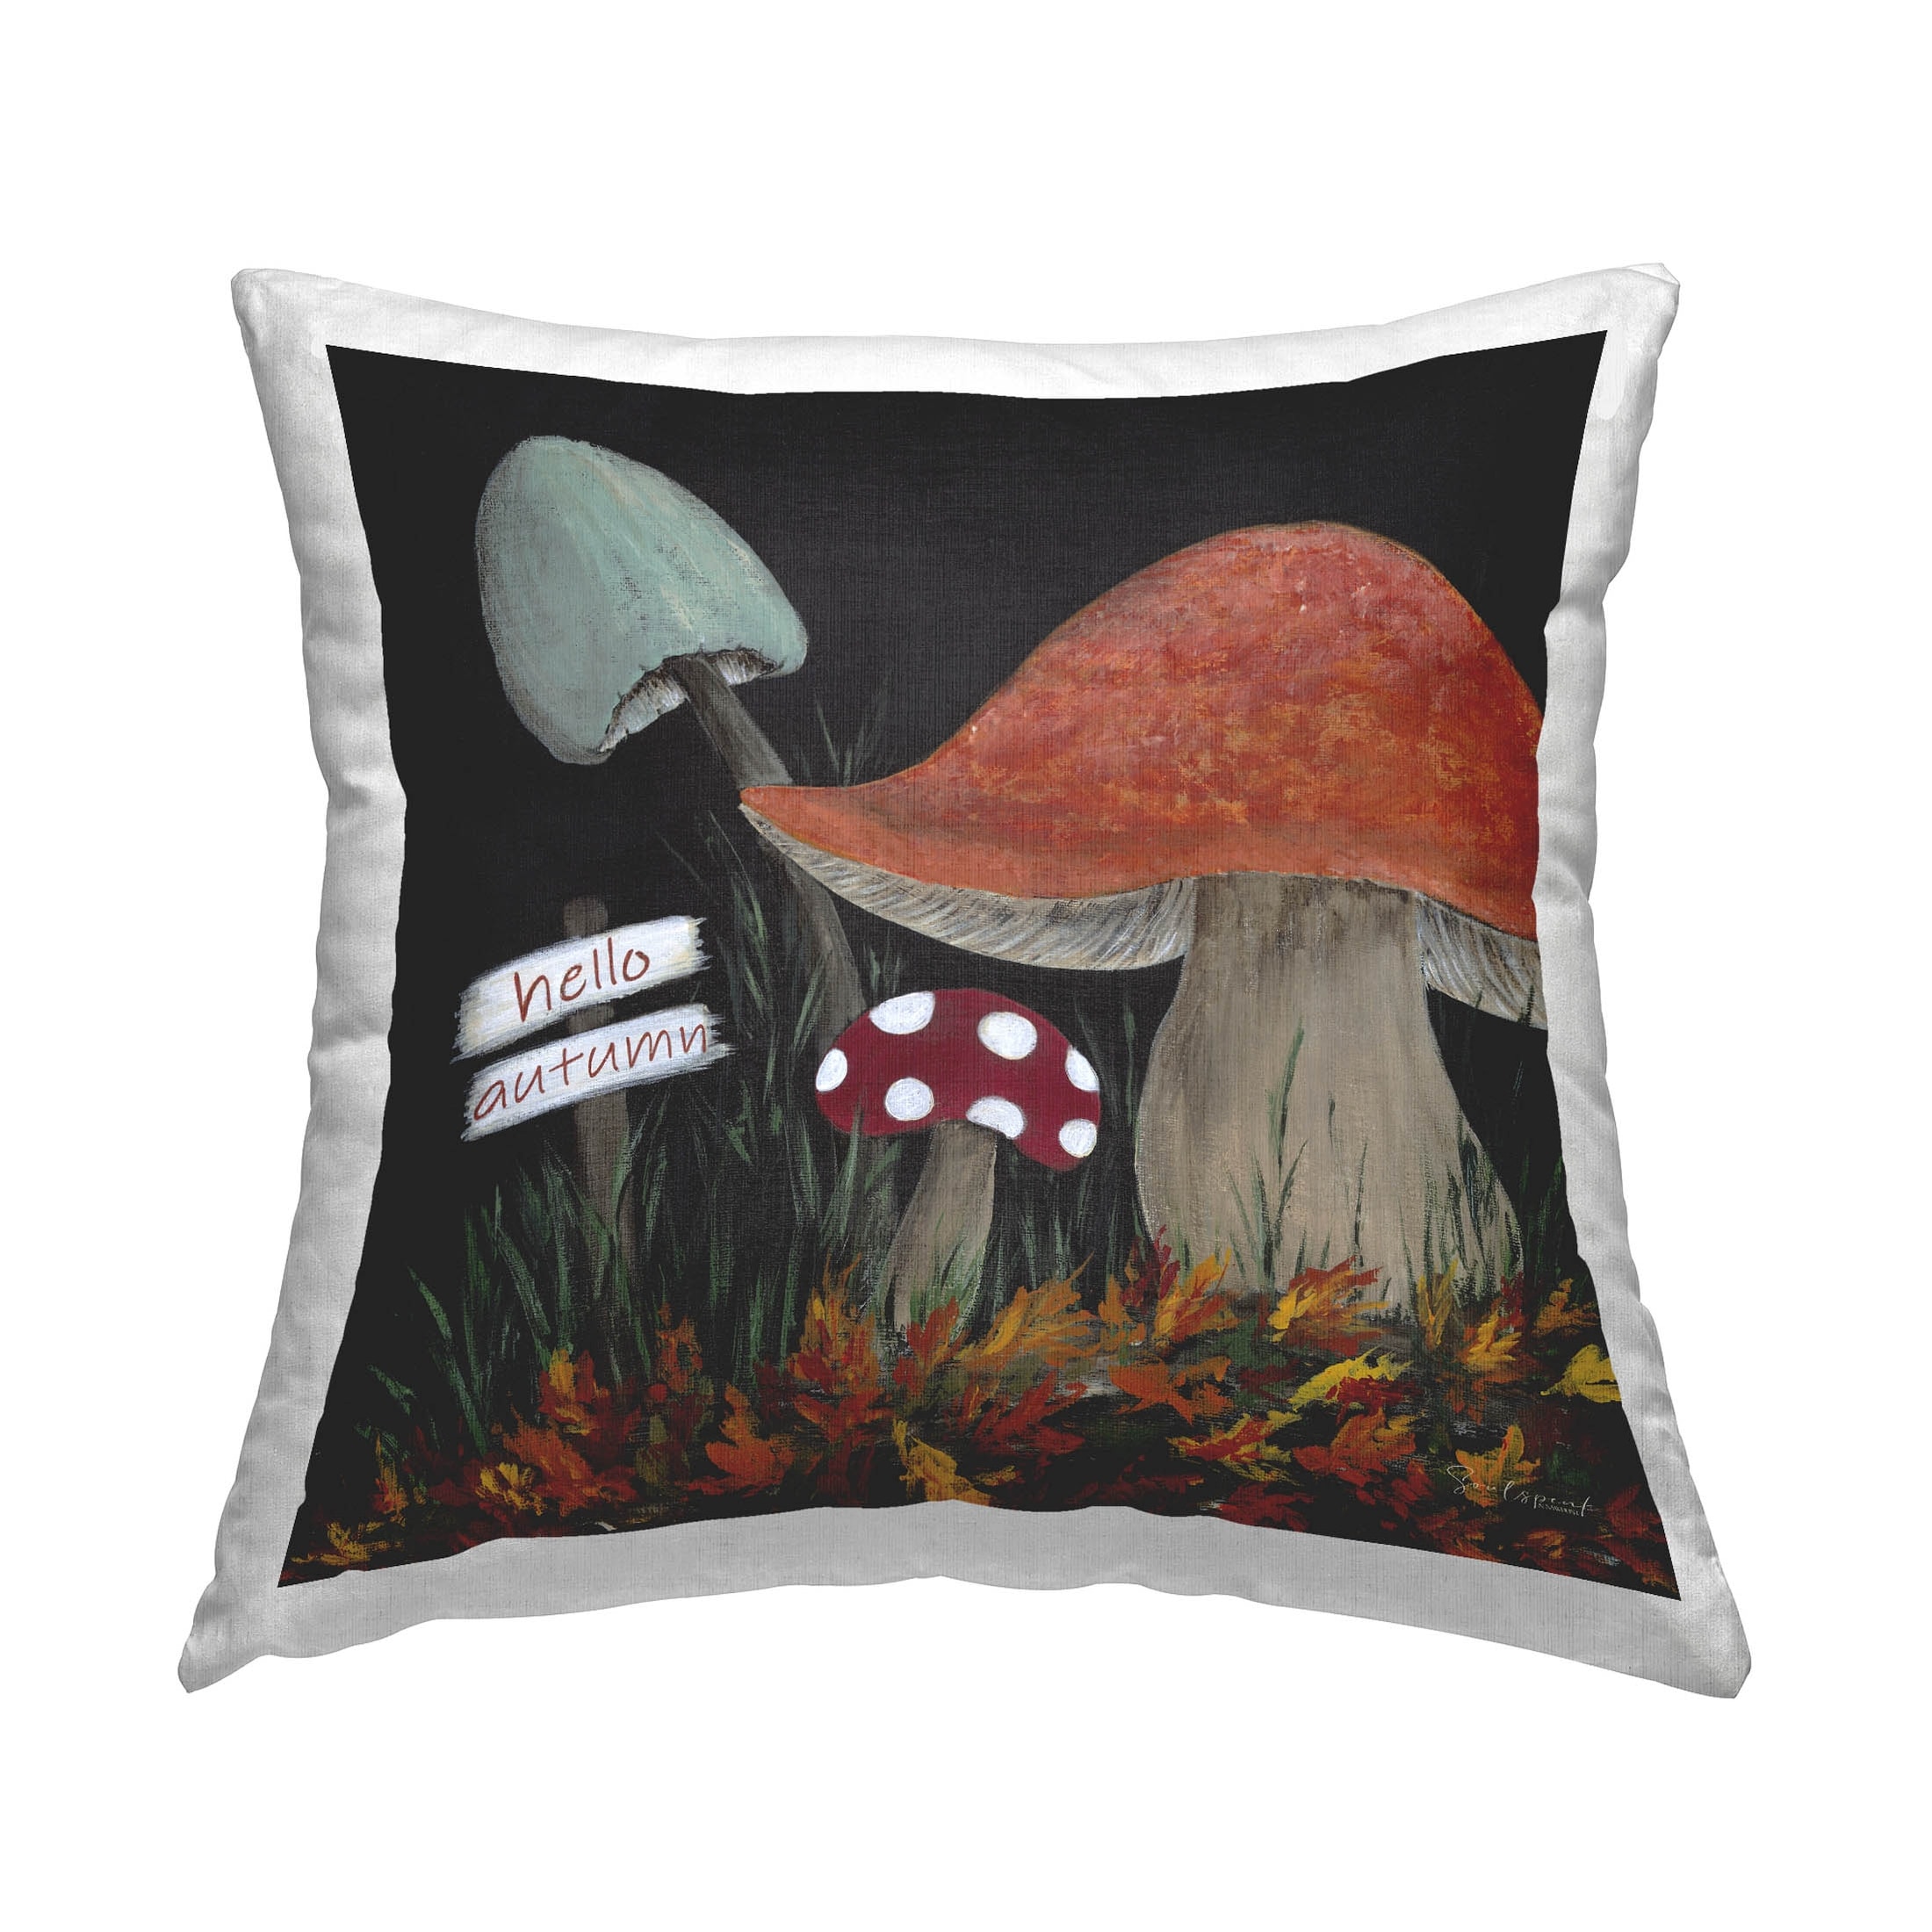 https://ak1.ostkcdn.com/images/products/is/images/direct/0c2156b003f9d61f17e15049e126d56511646db5/Stupell-Industries-Hello-Autumn-Woodland-Mushrooms-Printed-Throw-Pillow-Design-by-Soulspeak-%26-Sawdust.jpg